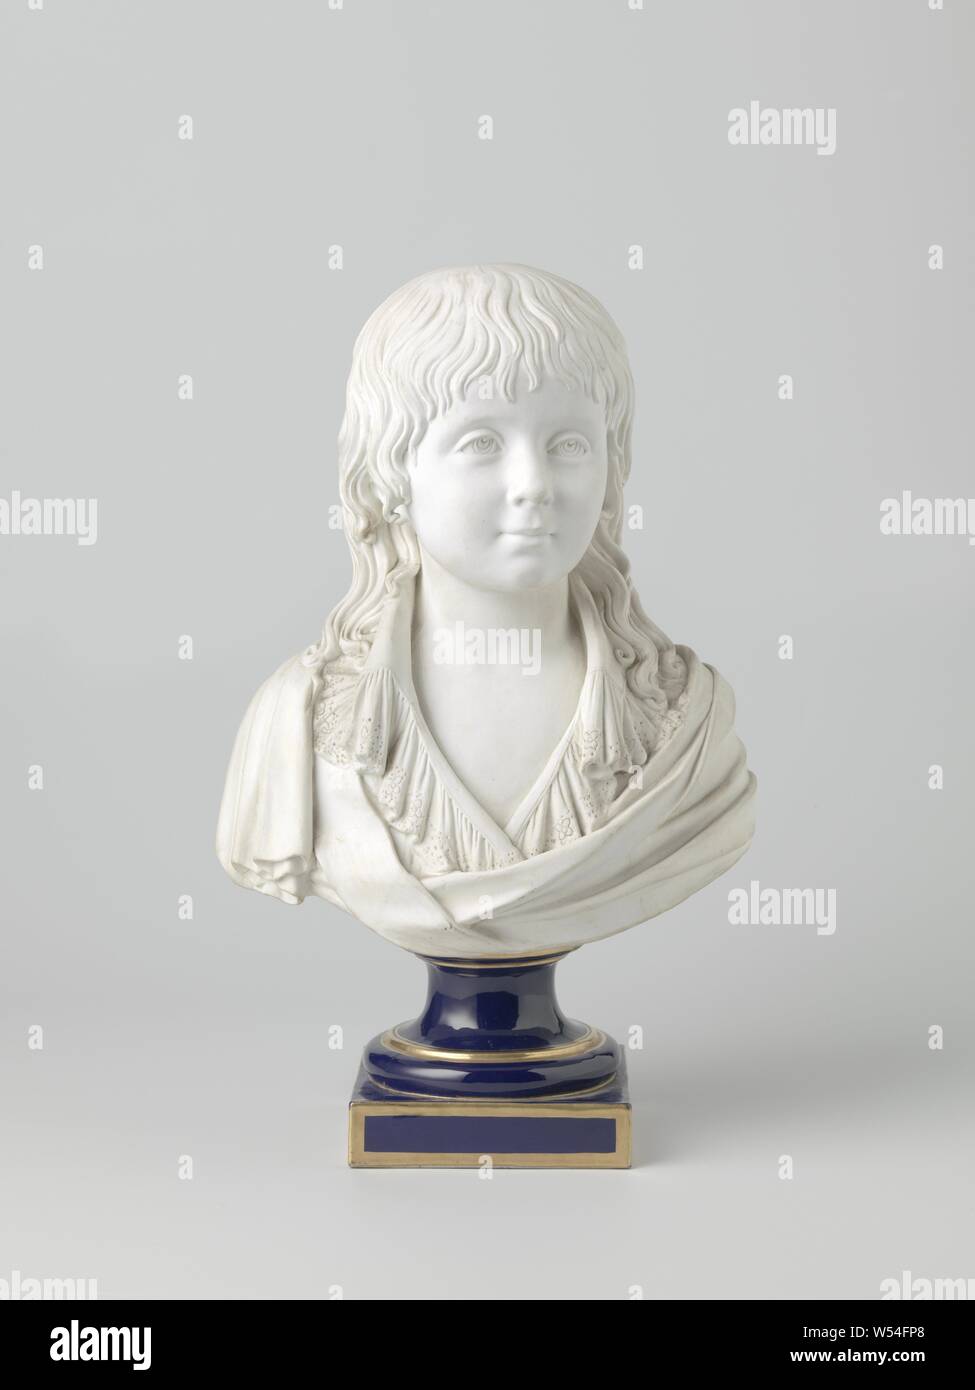 Bust portrait of Louis XVII in biscuit de porcelaine, as a boy of about 7 years with long locks up to the shoulders, wearing a chemisette with lace collar, on the chest left wide open, over it a sash from the right shoulder. The left shoulder is wrapped in a drapery drawn across the chest, mounted on a pedestal of dark ultramarine porcelain with golden piping. The mark is that of the manufacture royale de Sevres: jumbled, mirror-like L's, the loop of which, however, is not closed as usual, but open. This contains a small R, in addition a fashion designer brand, consisting of two crossed Stock Photo